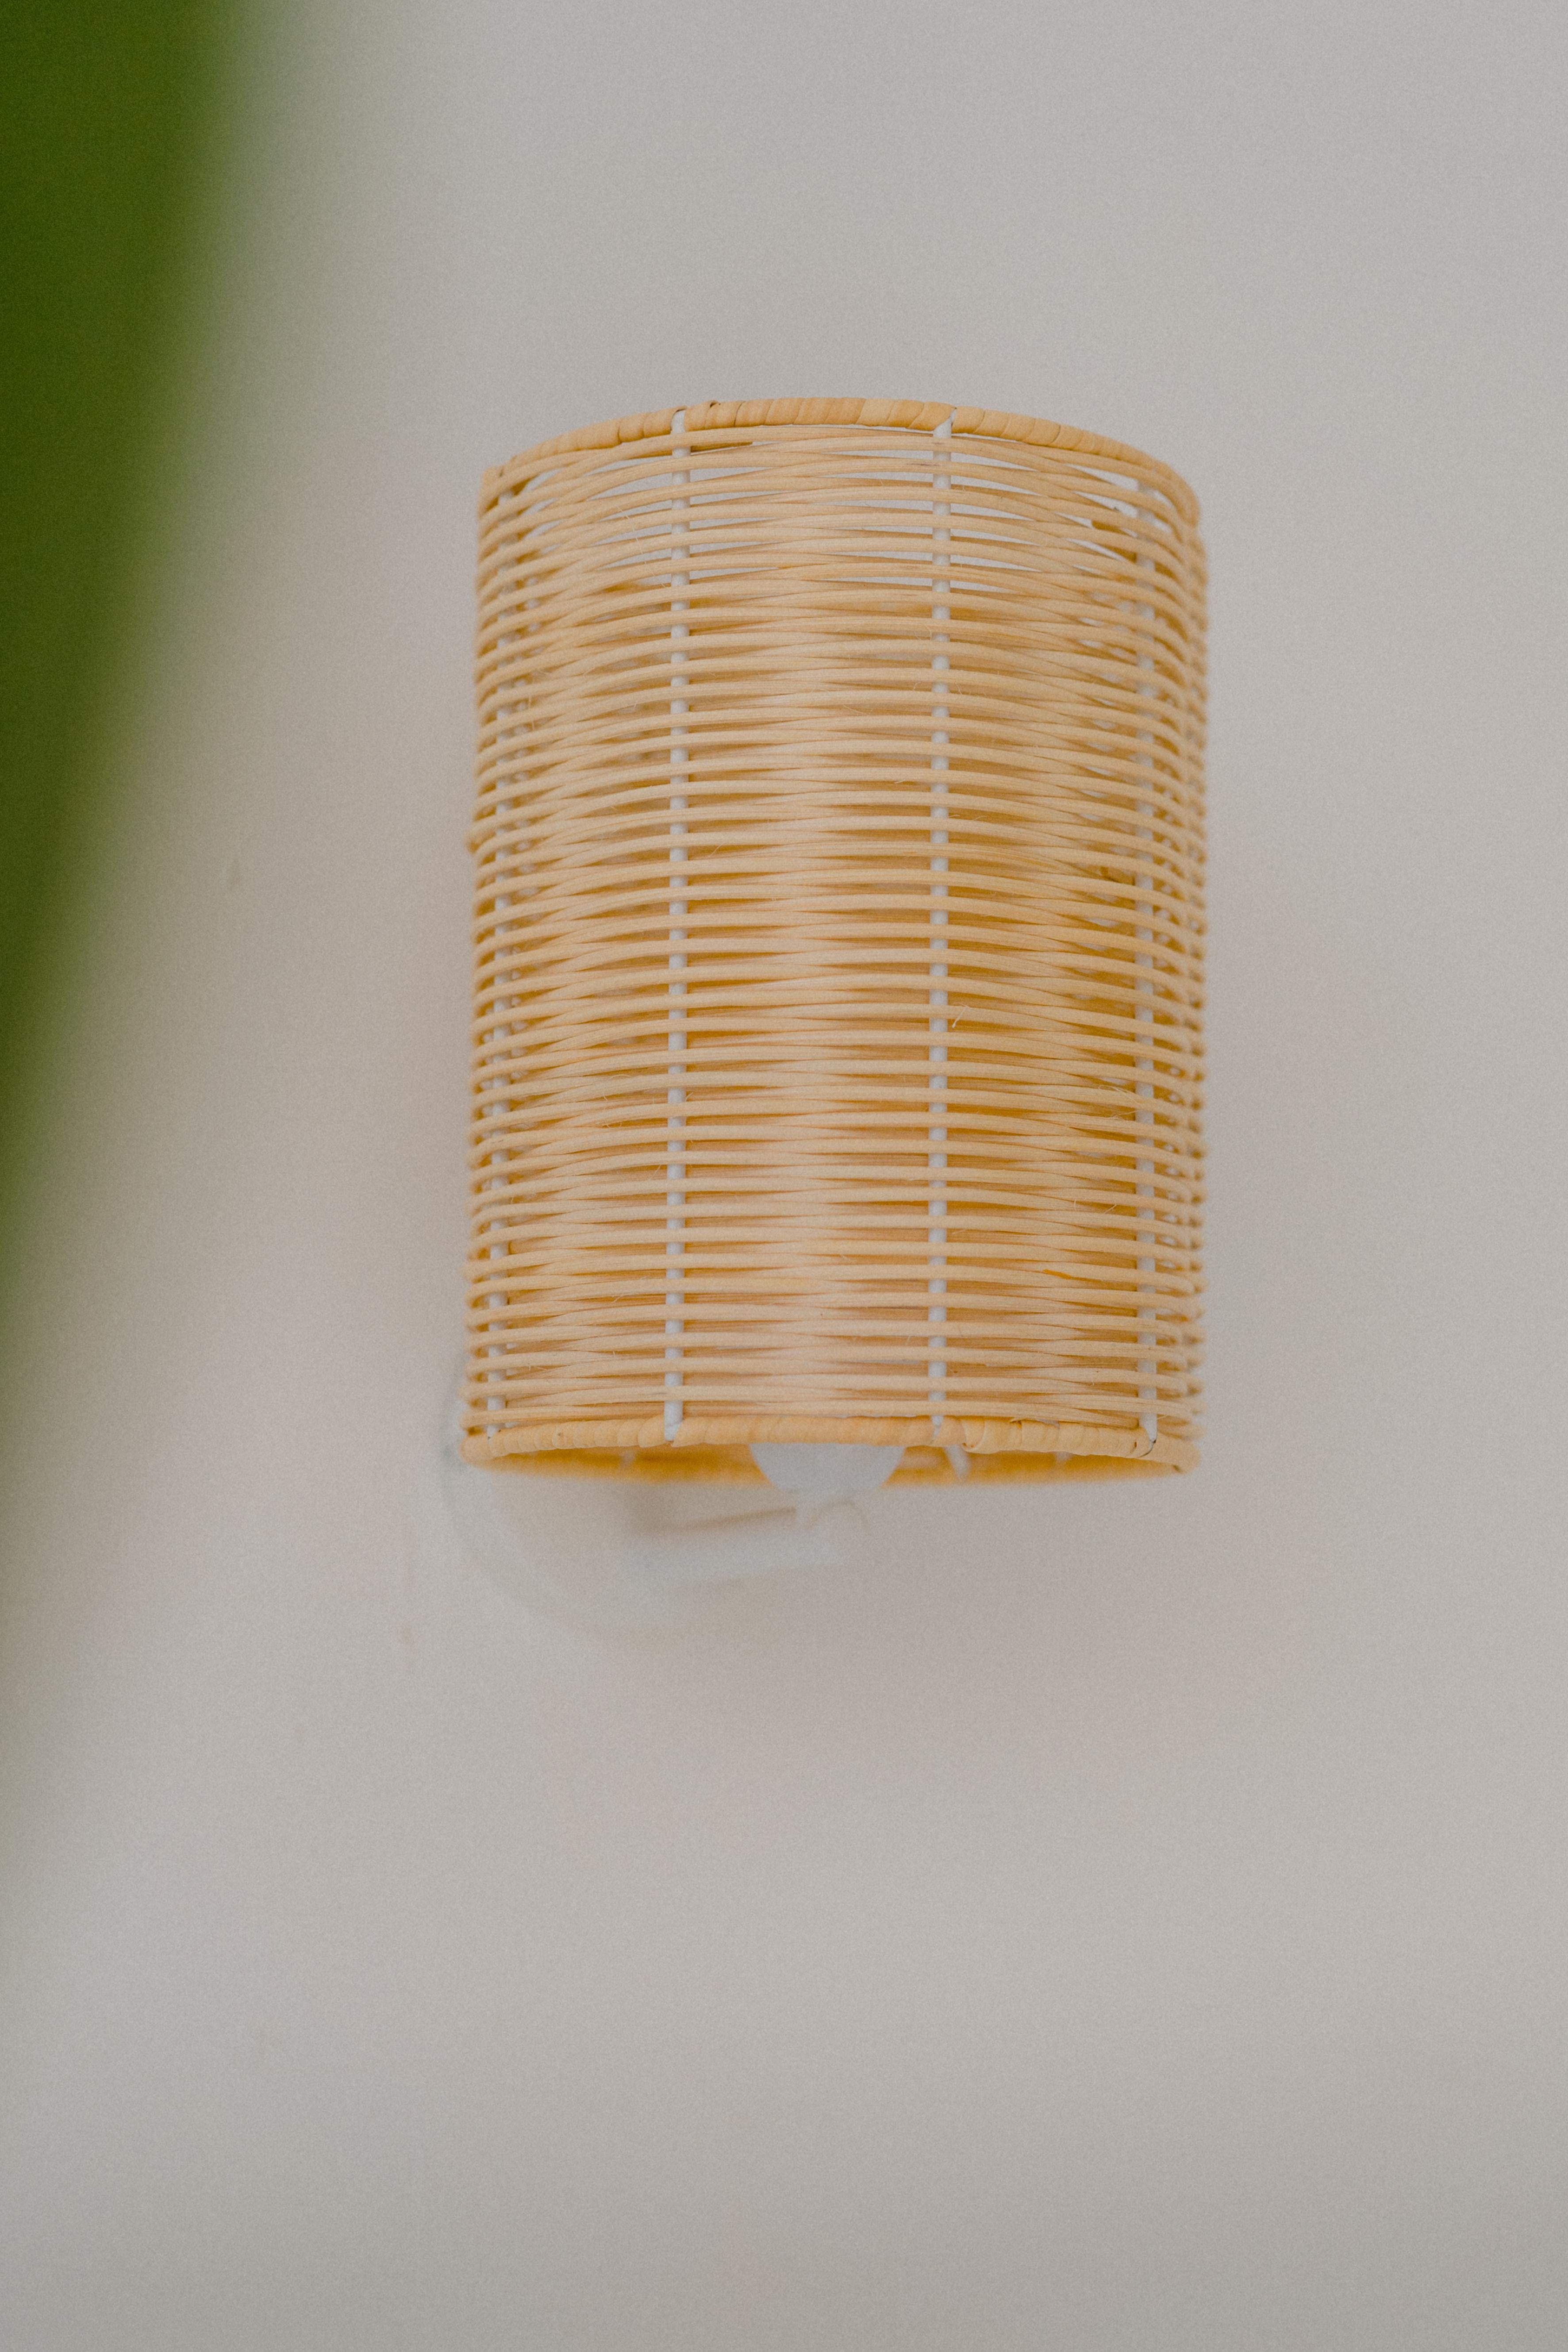 Modern Contemporary, Handmade, Wall Lamp, Rattan Cylinder, by Mediterranean Objects -A For Sale